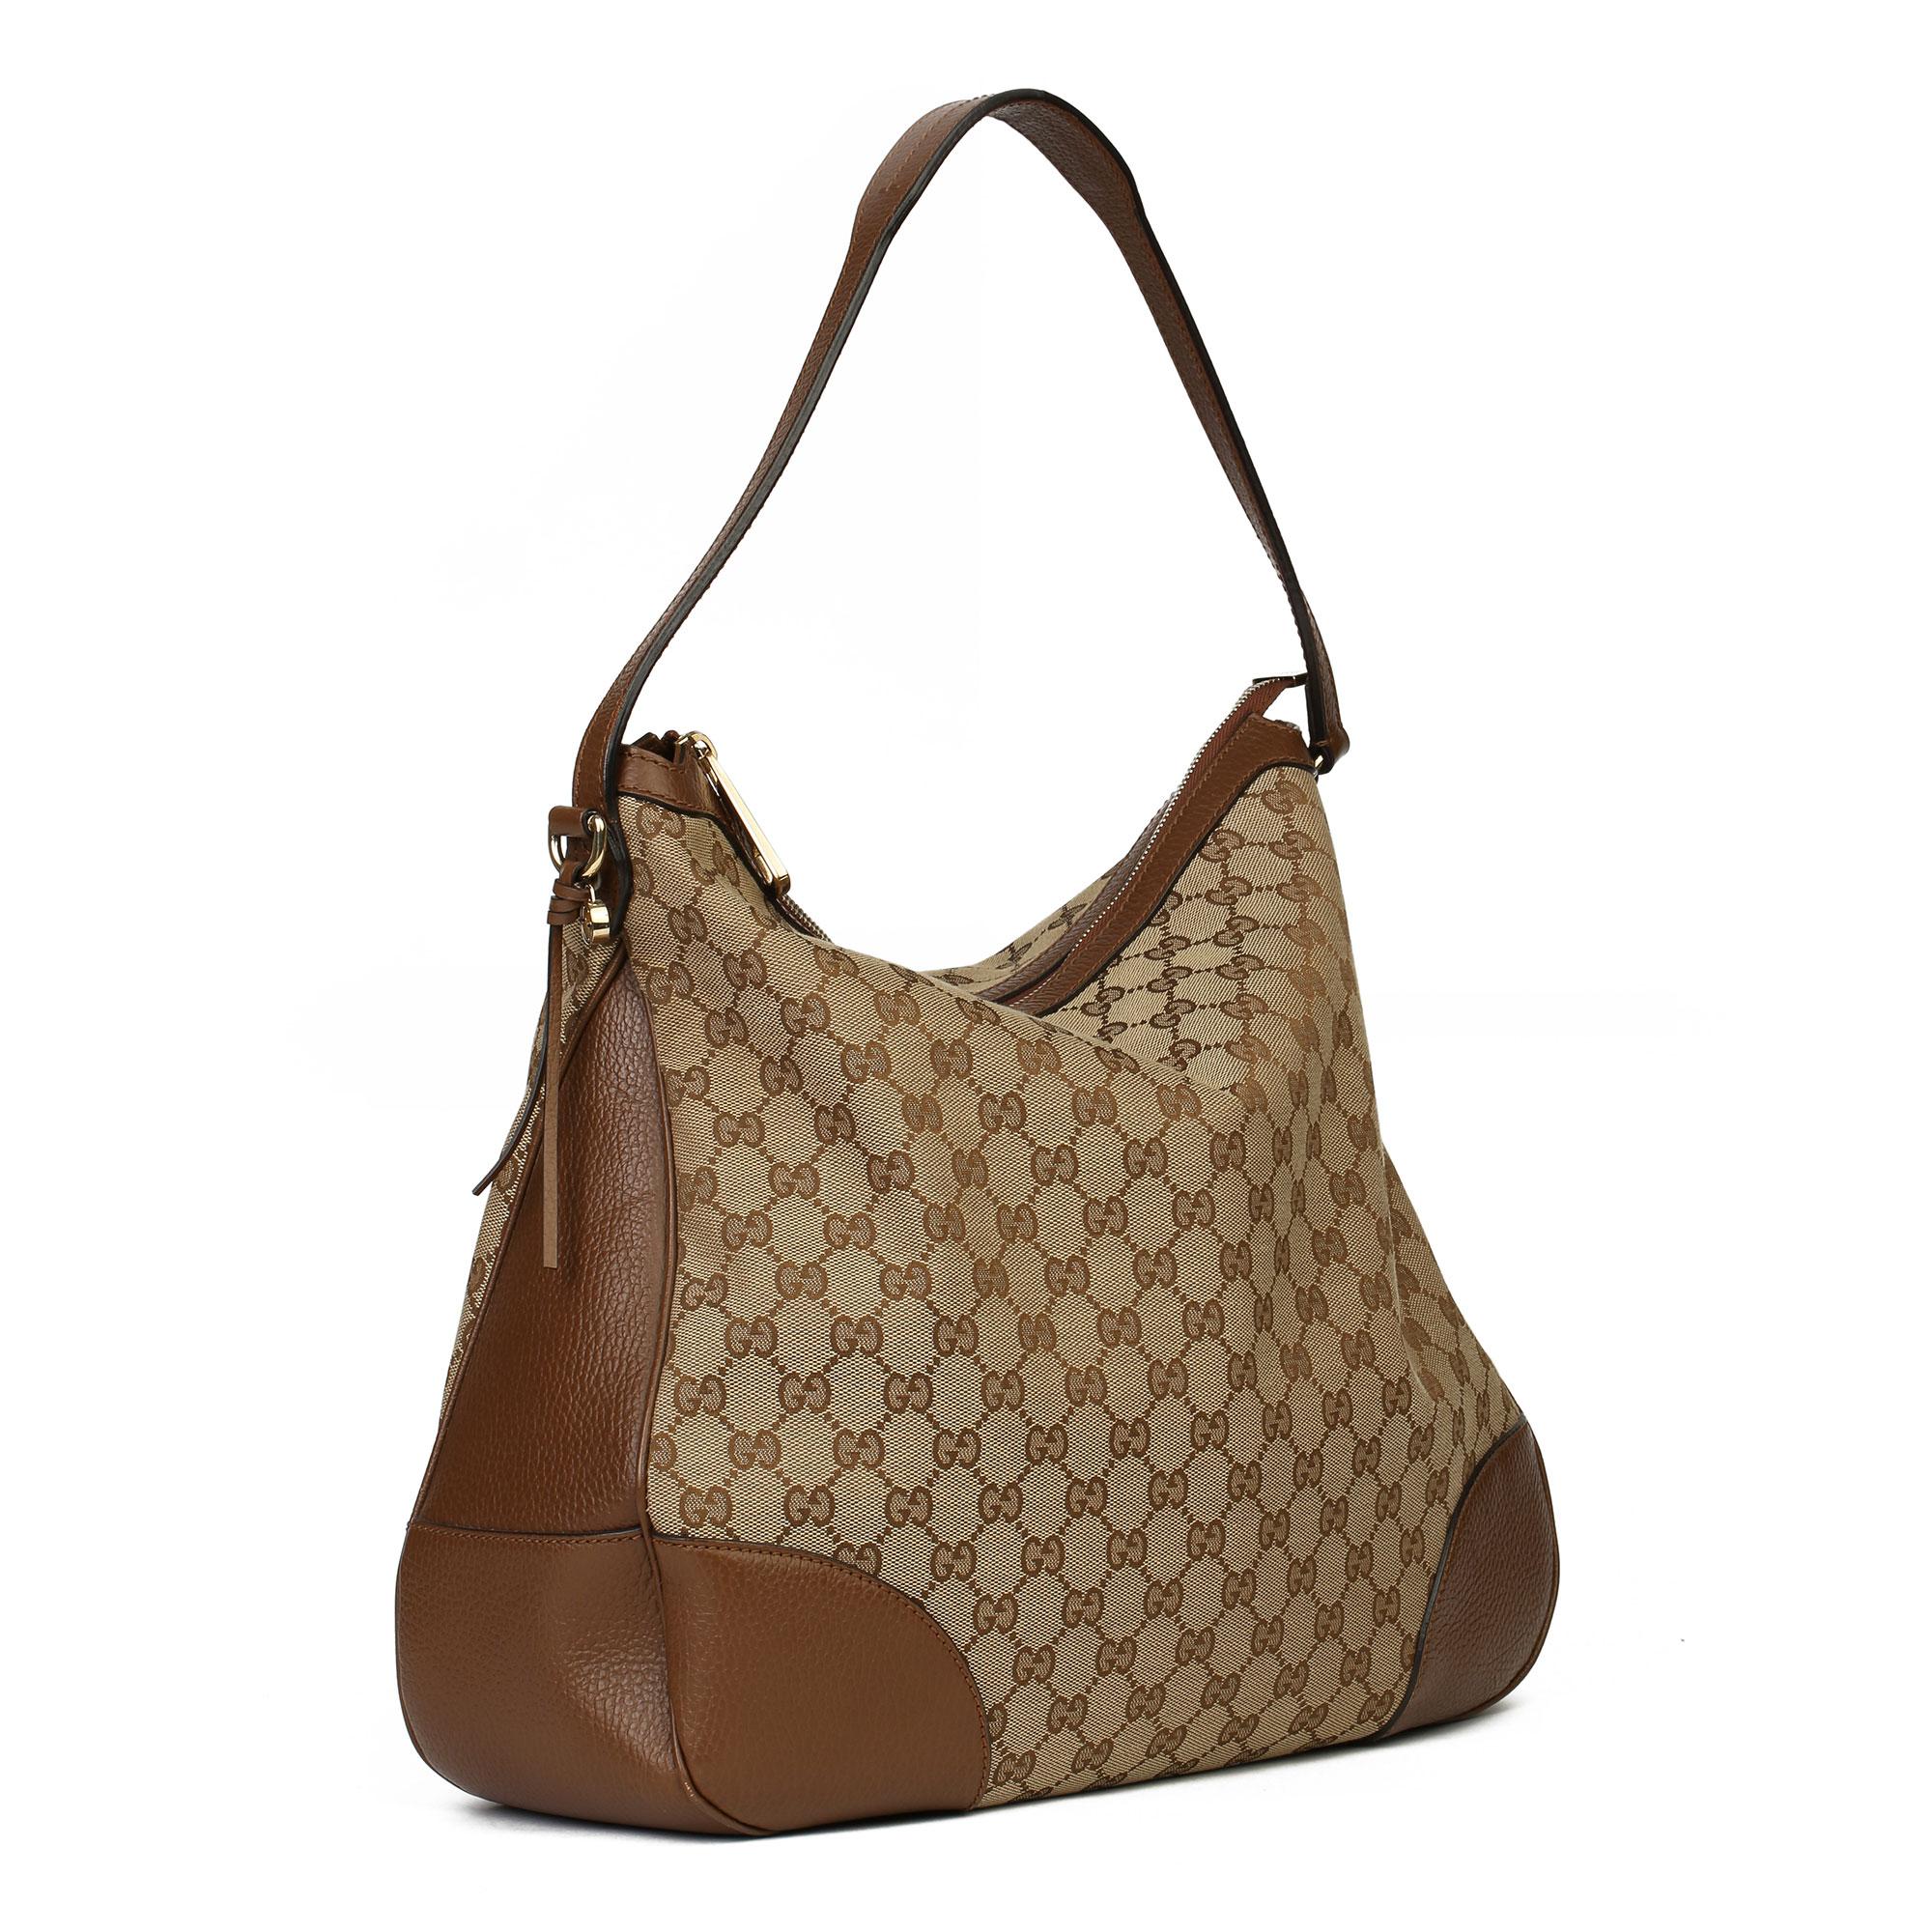 GUCCI
Brown GG Canvas & Brown Calfskin Leather Bree Hobo with Wallet

Xupes Reference: CB314
Serial Number: 
Age (Circa): 2018
Accompanied By: Gucci Dust Bag, Care Booklet, Wallet
Authenticity Details: Date Stamp (Made in Italy) 
Gender: